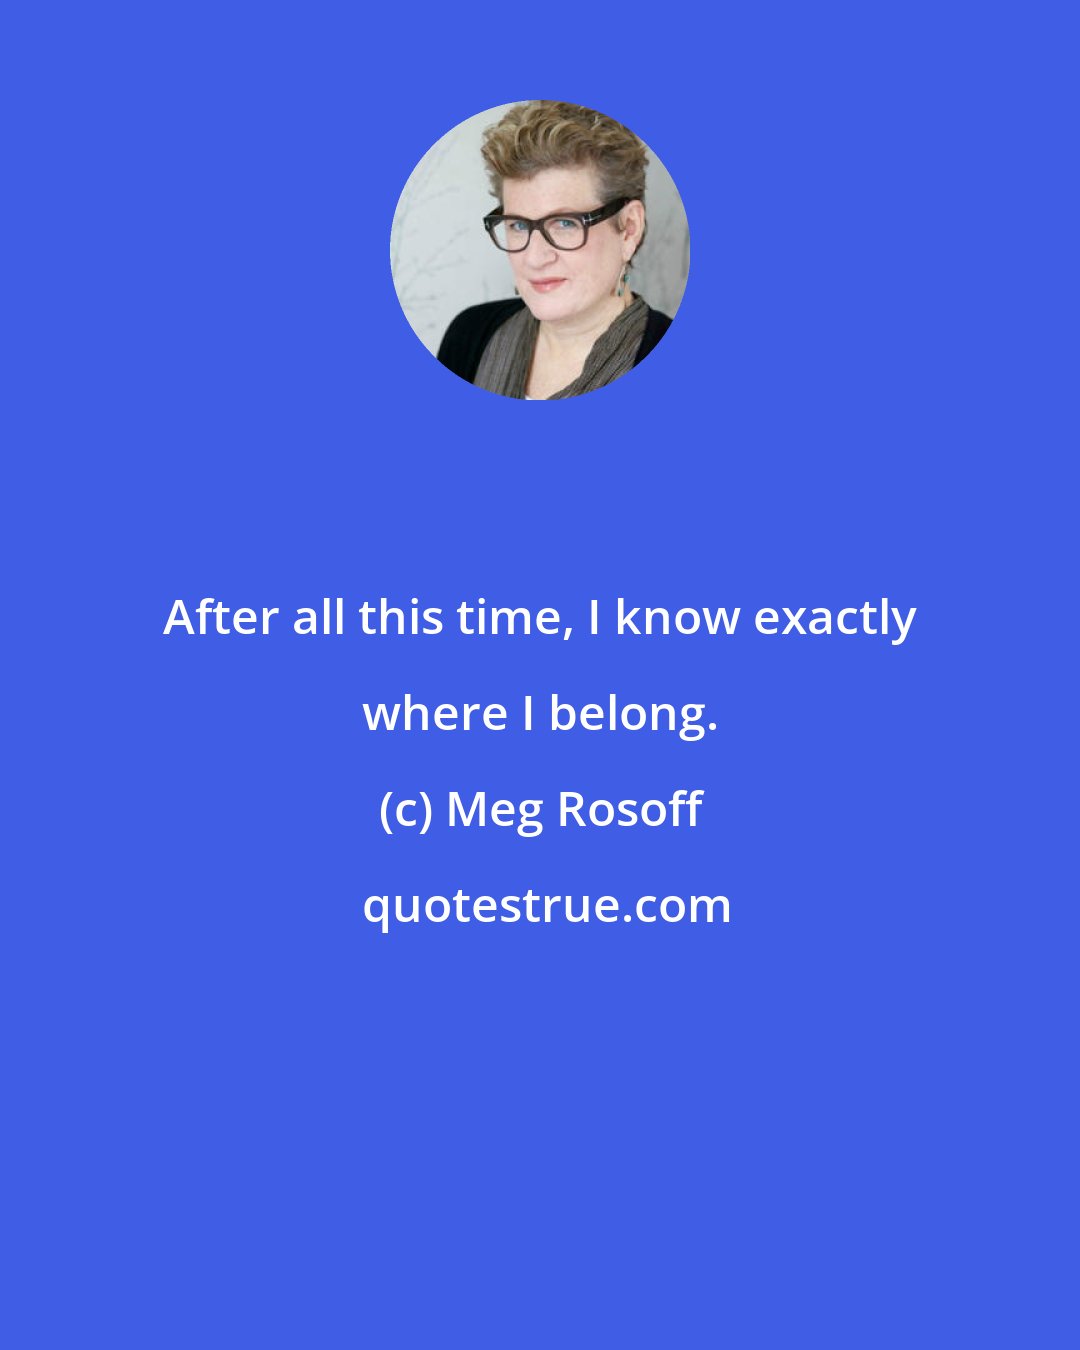 Meg Rosoff: After all this time, I know exactly where I belong.